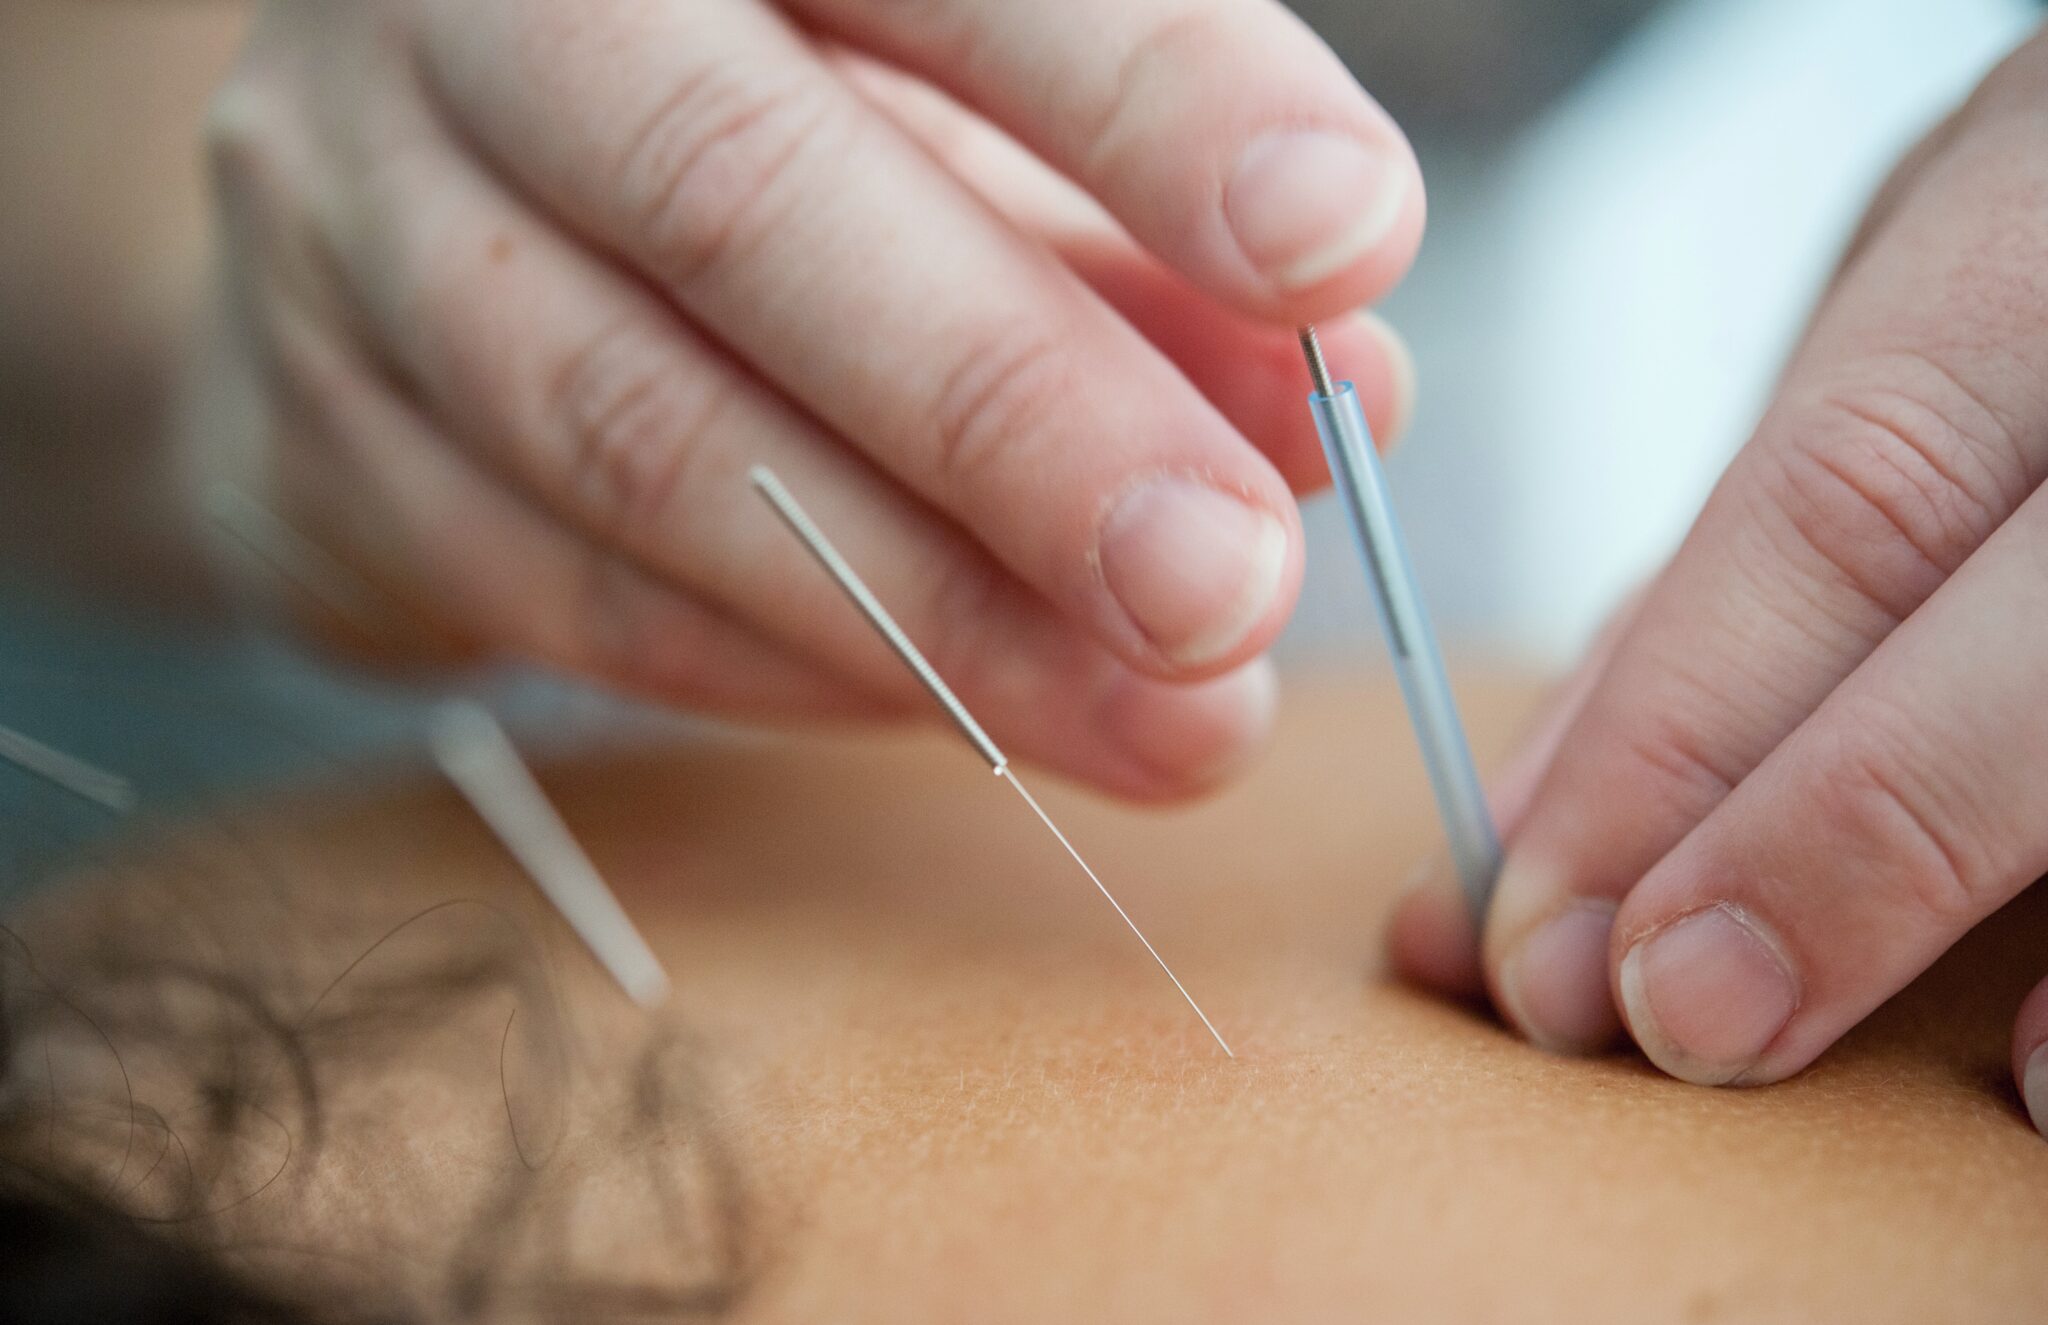 Can Acupuncture Treat Infertility